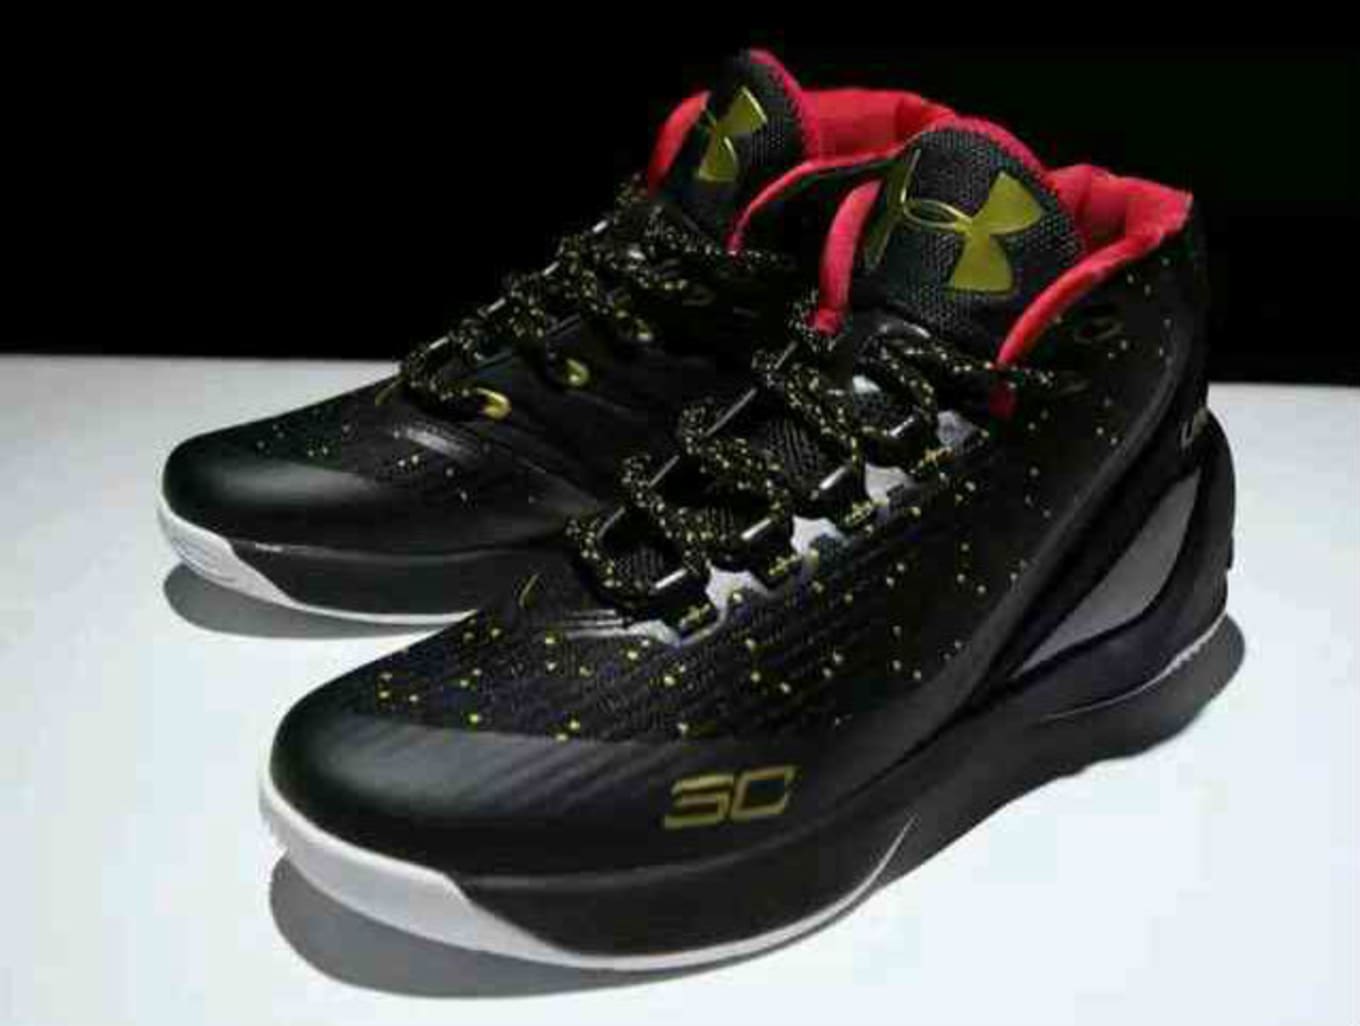 curry 3 gold